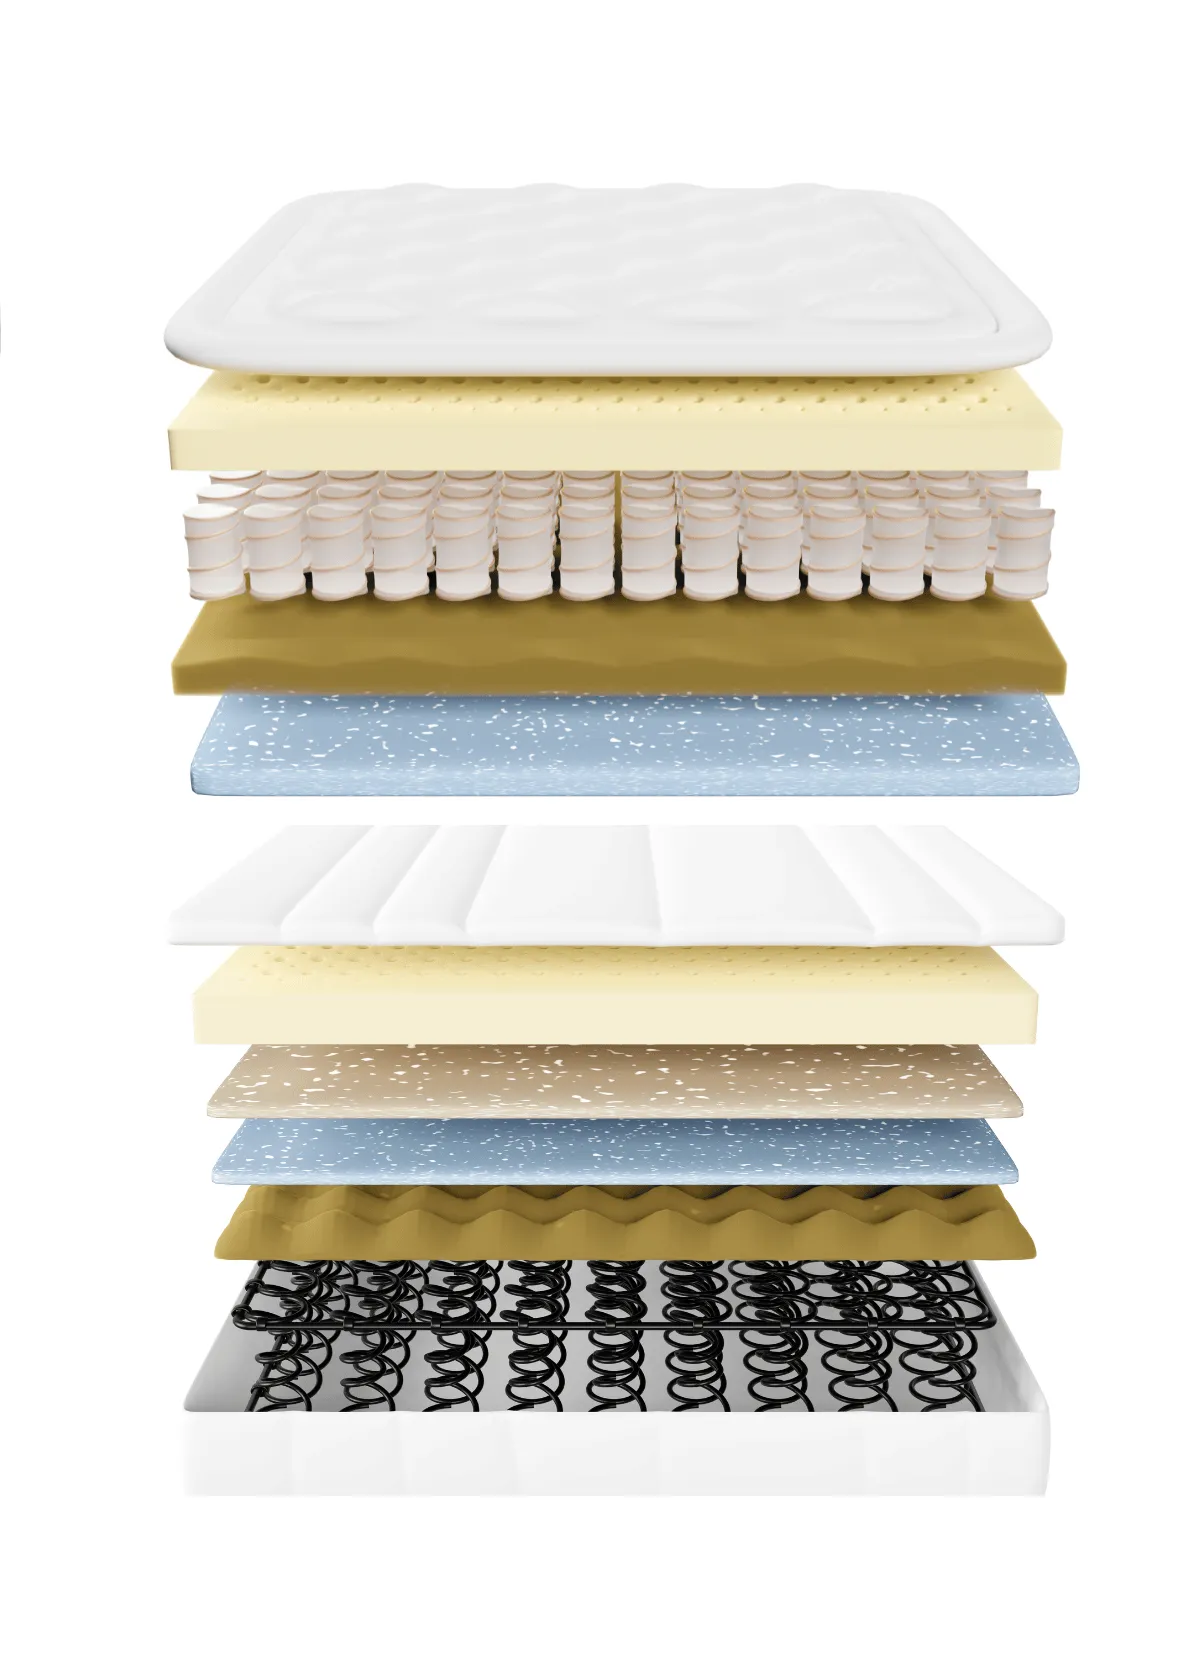 "Mattress Materials - Making the Right Choice for a Good Night's Sleep"